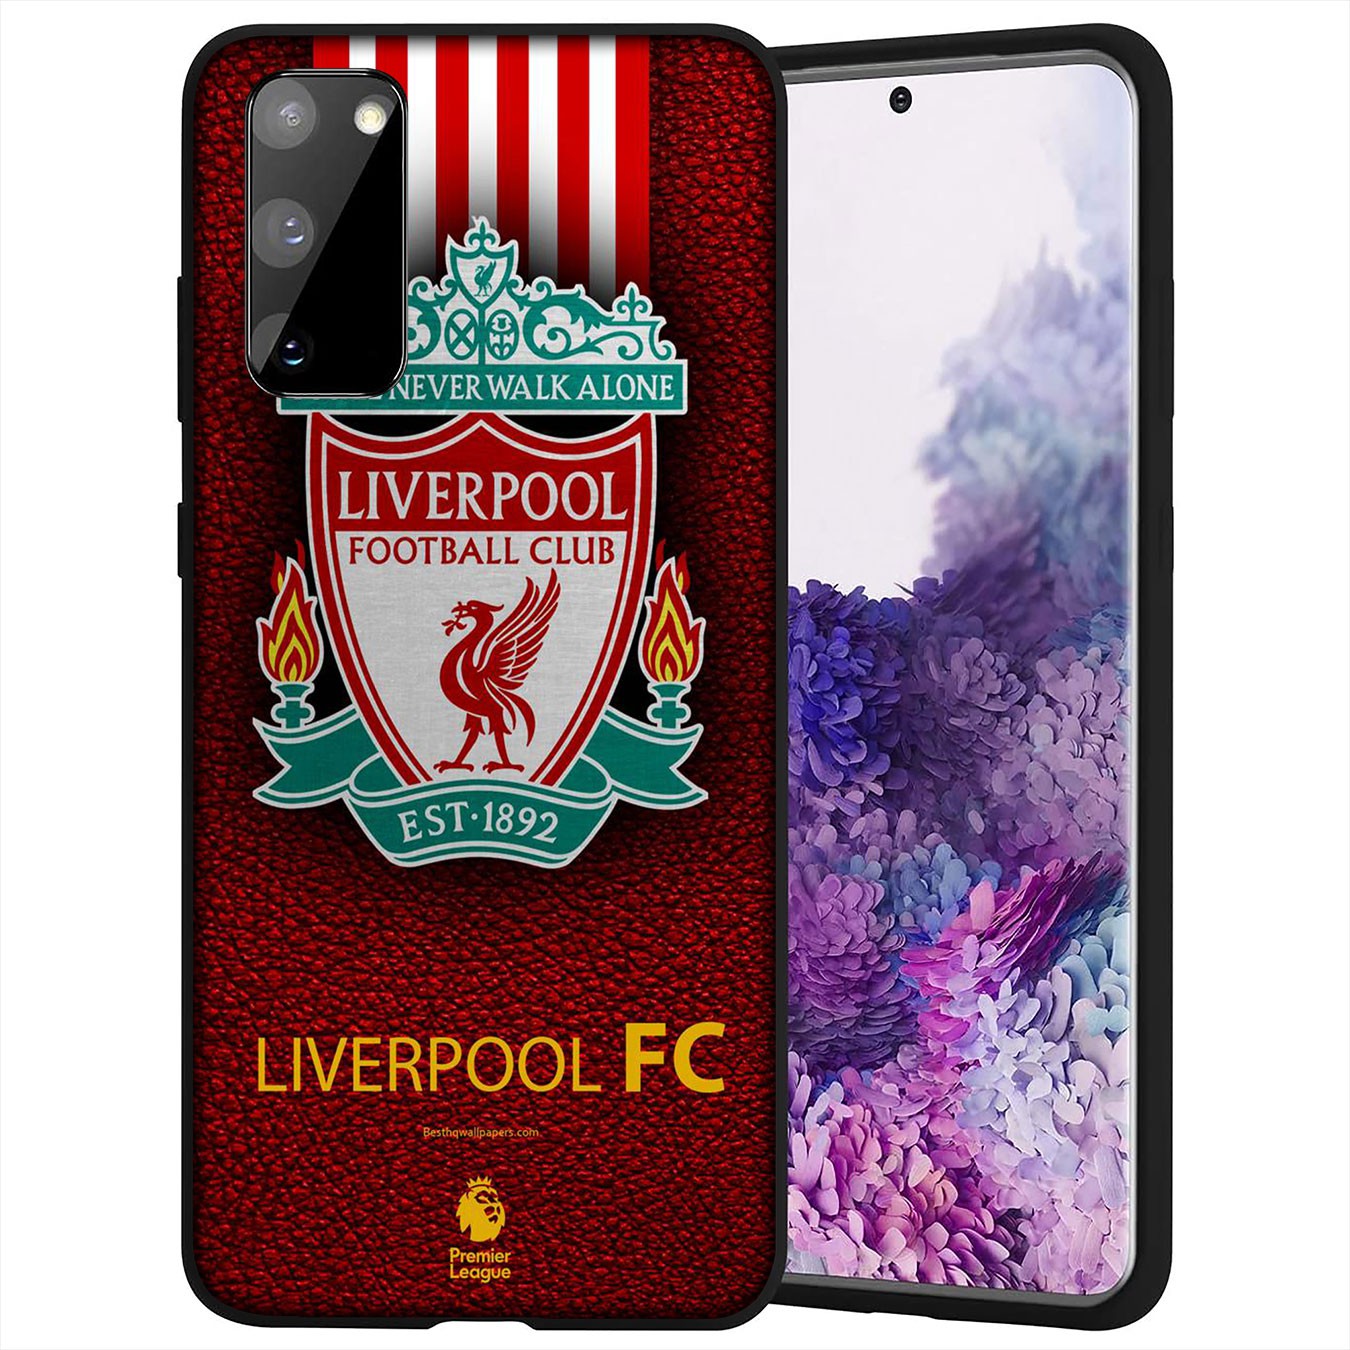 Samsung Galaxy A11 A31 A10 A20 A30 A50 A10S A20S A30S A50S A71 A51 Casing Soft Silicone Liverpool red Logo Phone Case